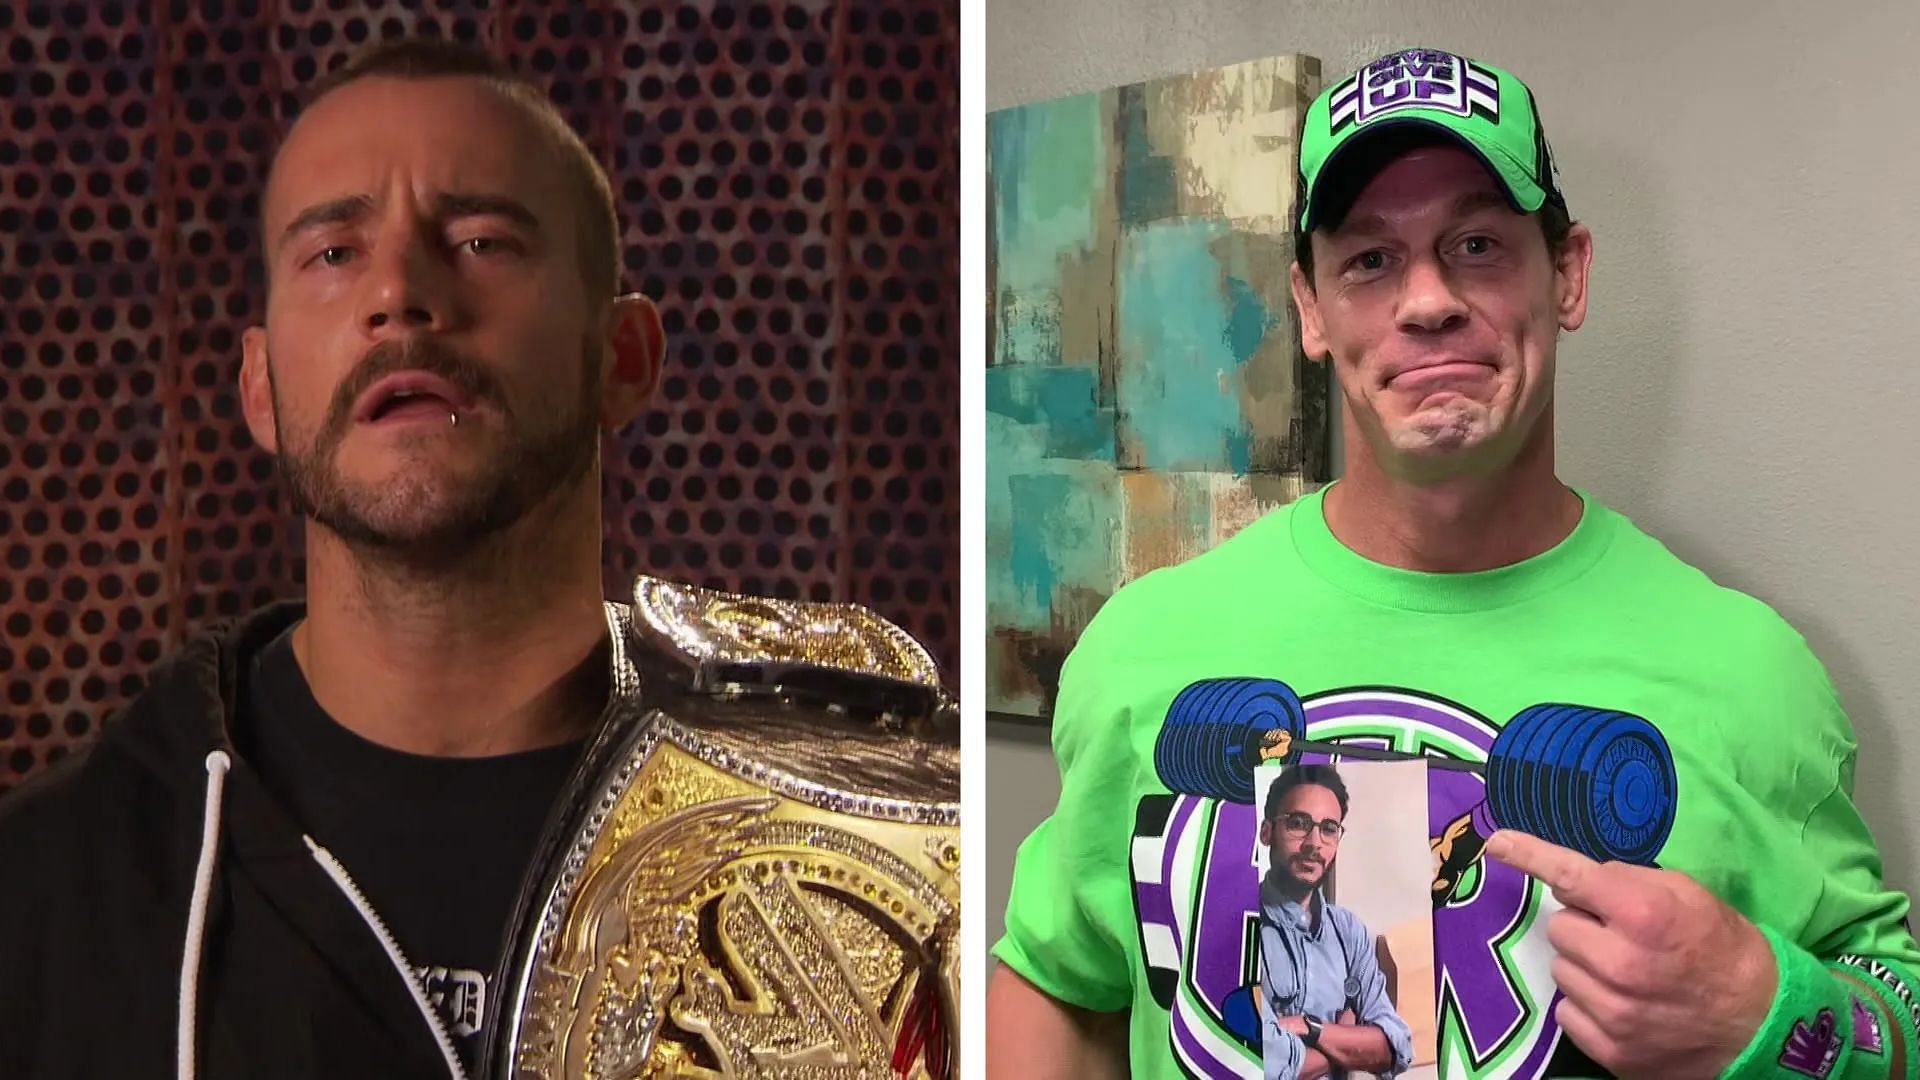 CM Punk has victories over several major WWE stars